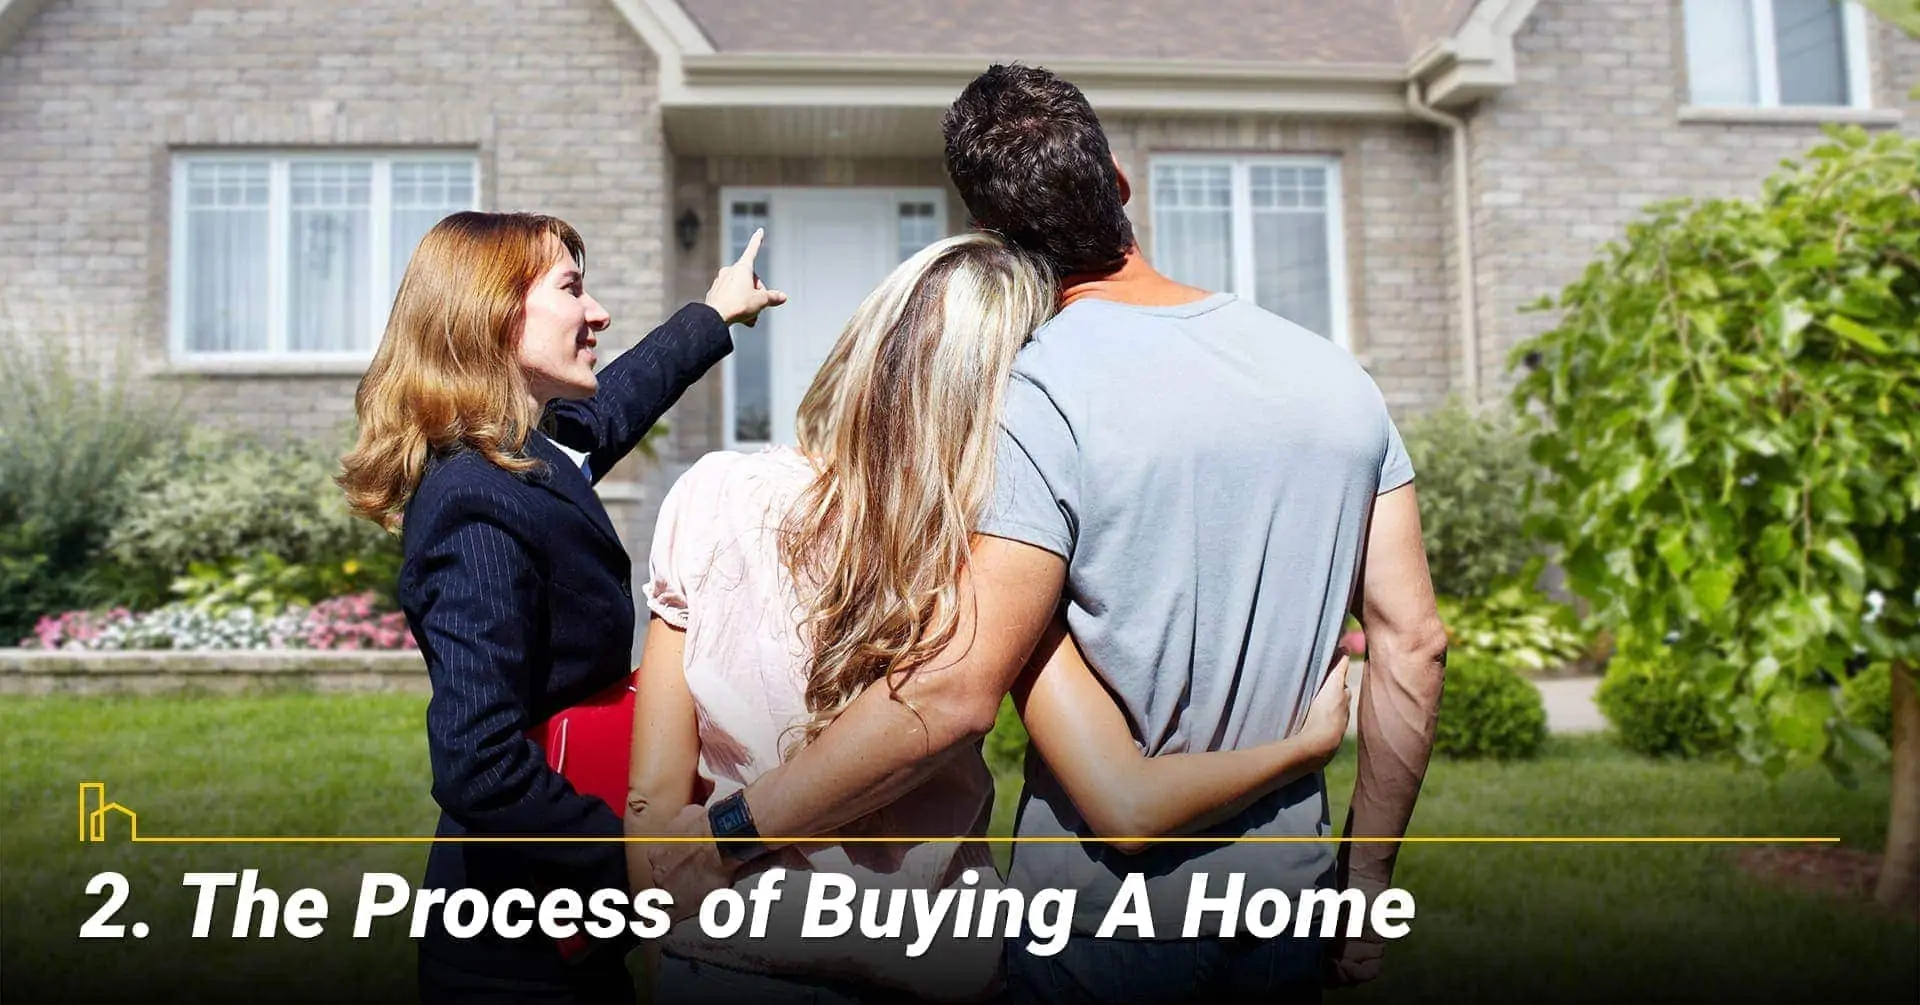 The Process of Buying A Home, steps to buy a home